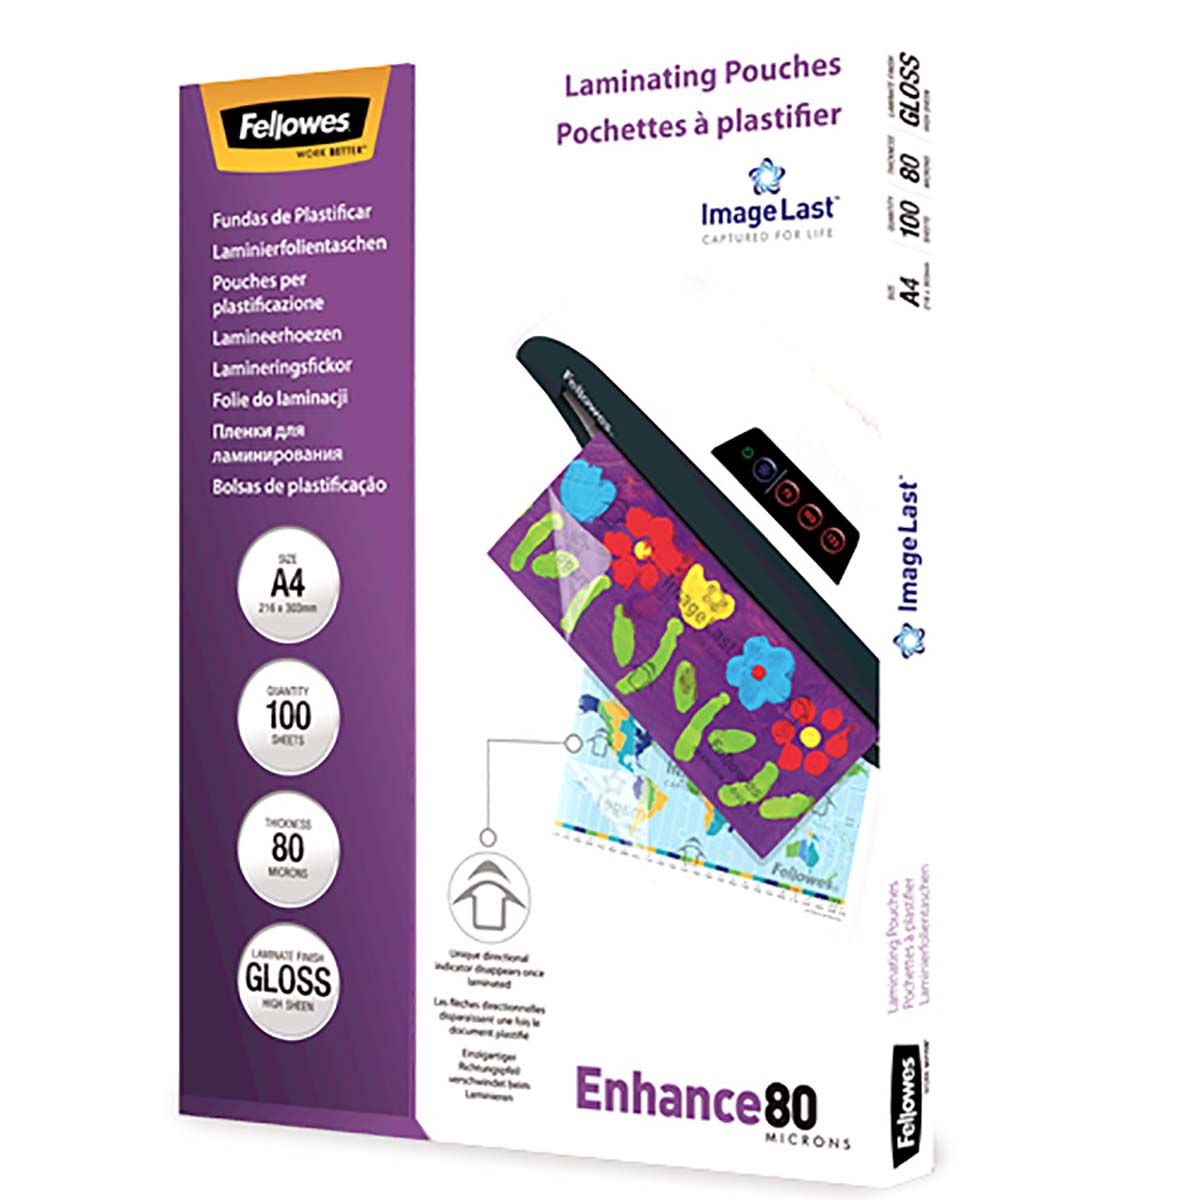 Fellowes A3 Glossy Laminator Pouches 80micron Thickness, 100 Pack Quantity